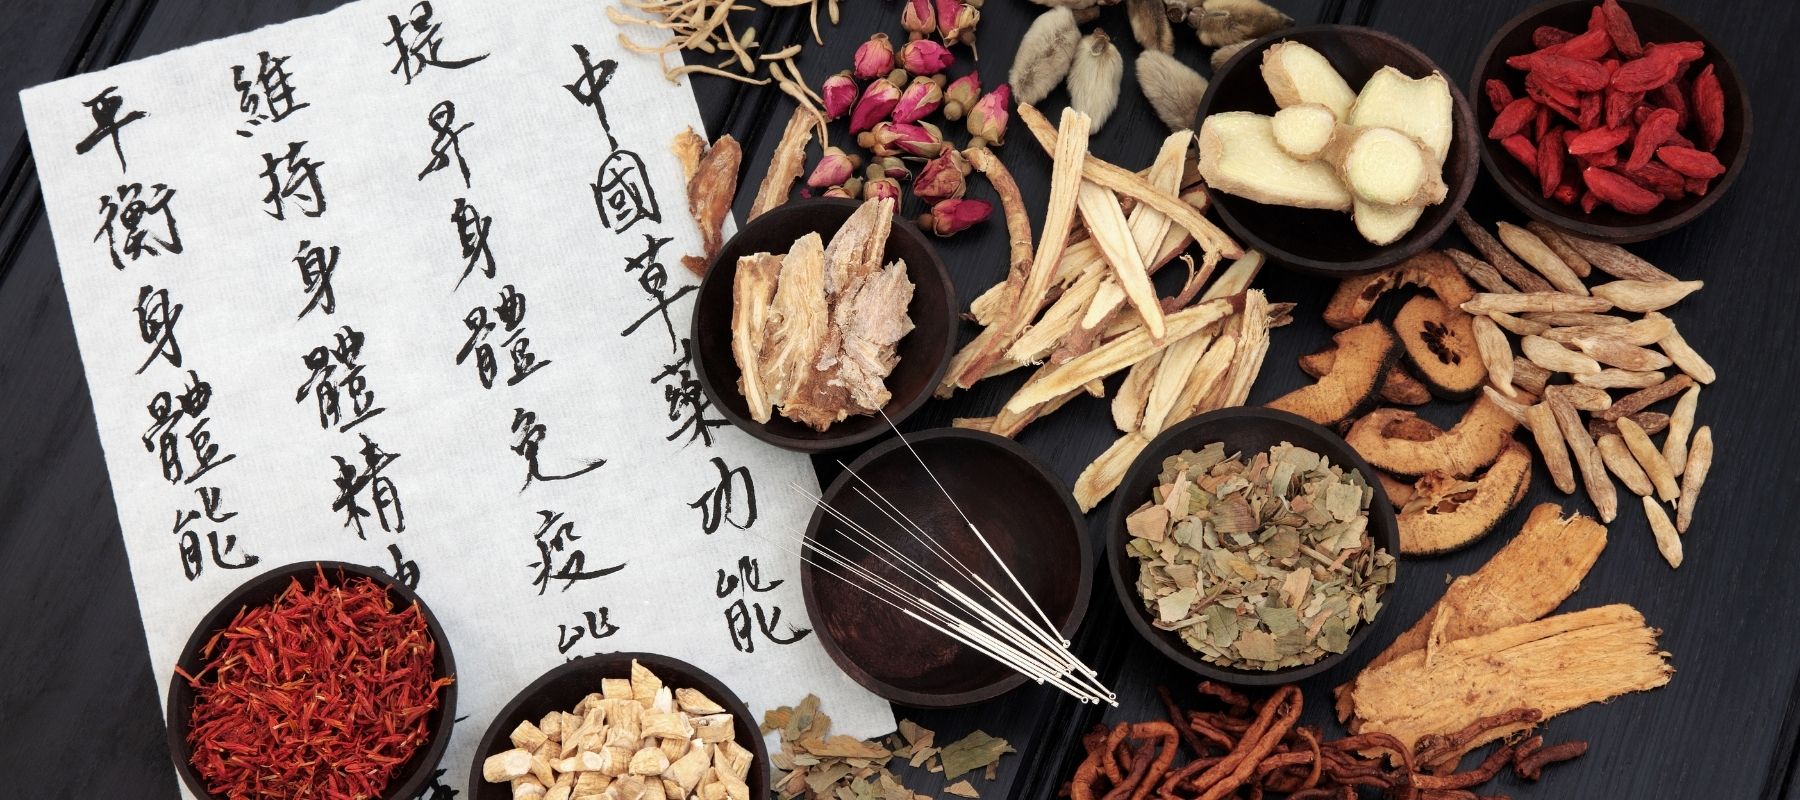 How can Chinese Medicine assist with healing Psoriasis